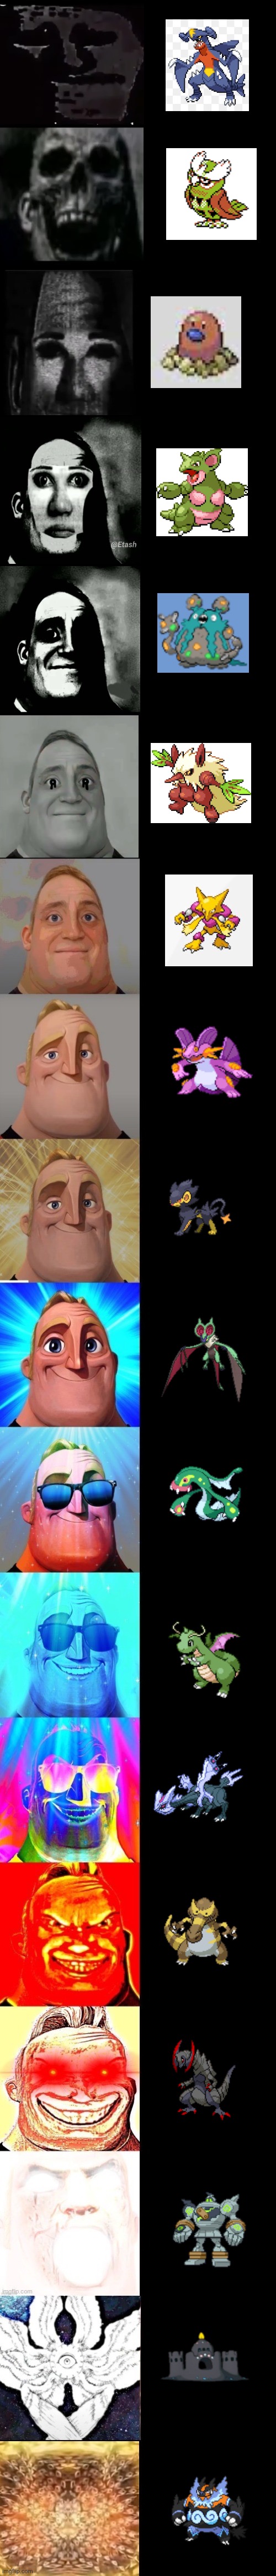 My favorite shiny is either pallosand’s or emboar | image tagged in mr incredible from trollge to god,pokemon,shiny,funny,memes,relatable | made w/ Imgflip meme maker